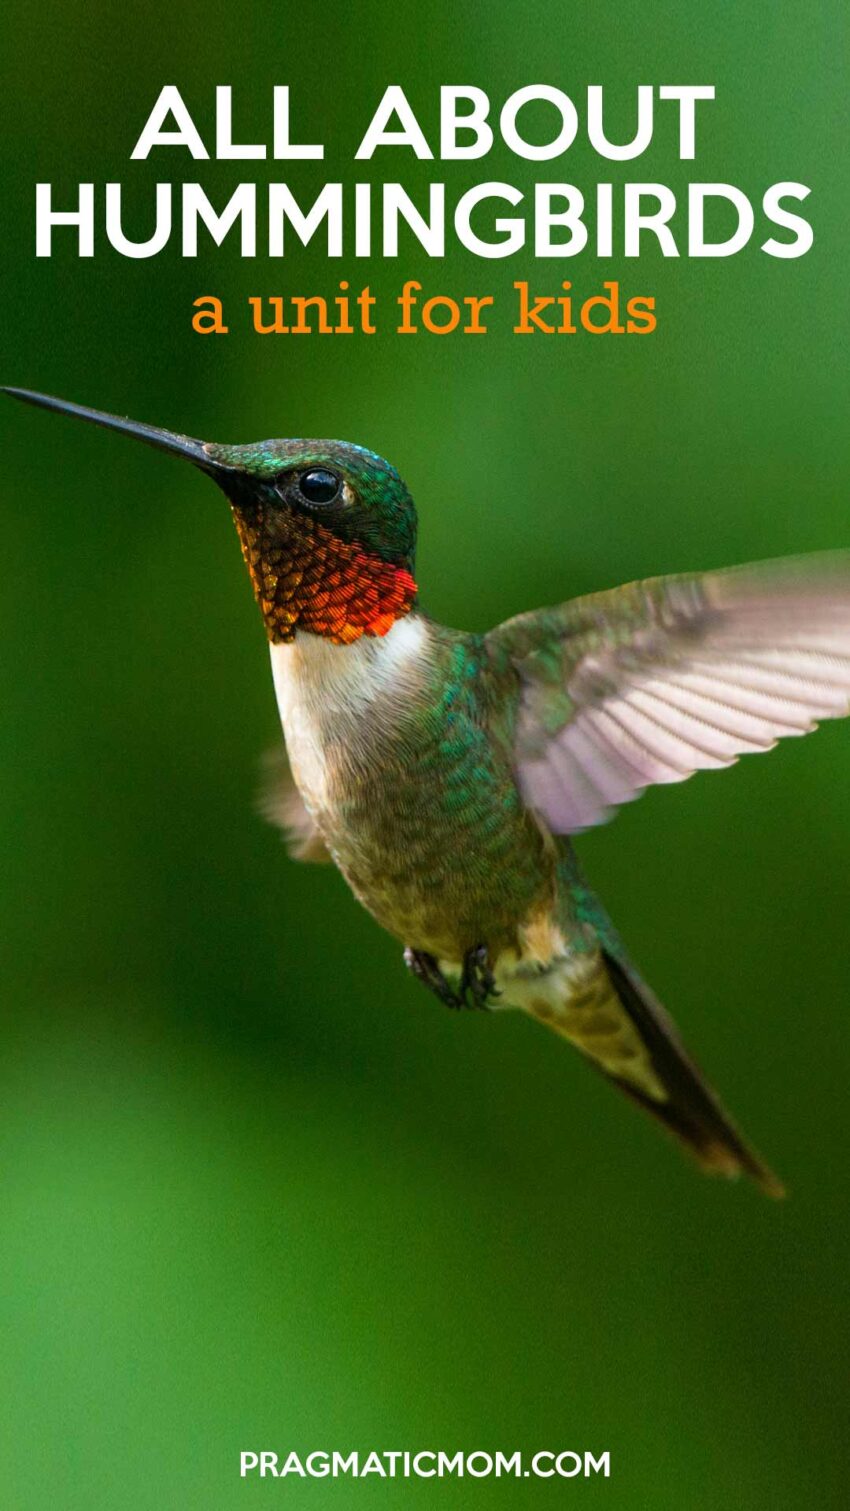 All About Hummingbirds: A Unit for Kids